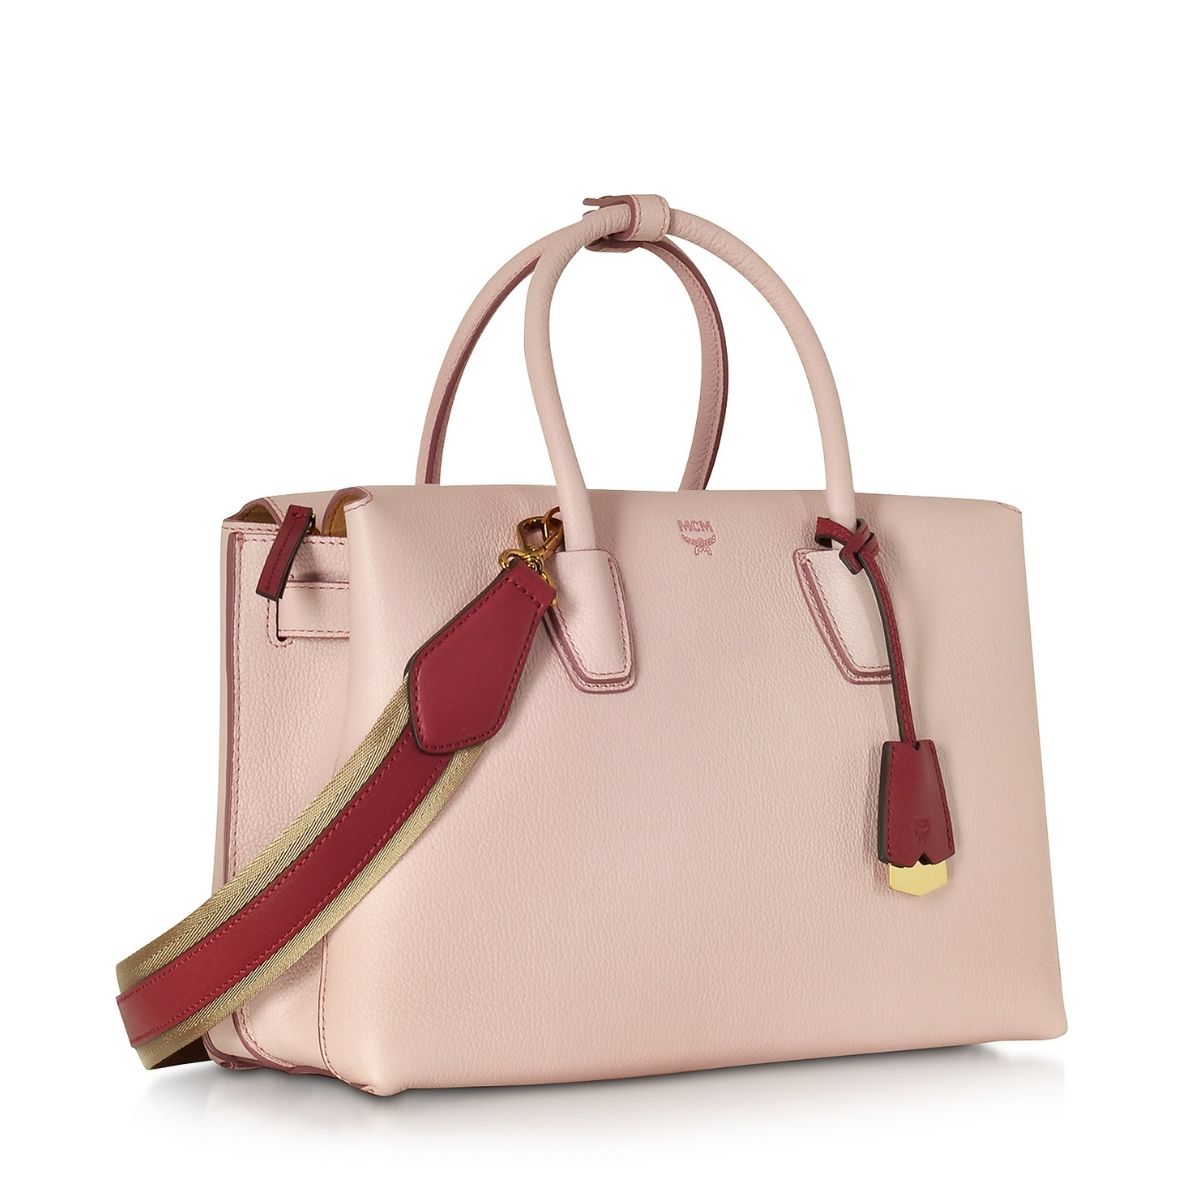 MCM Worldwide MCM MILLA TOTE IN PARK AVENUE LEATHER 720.00